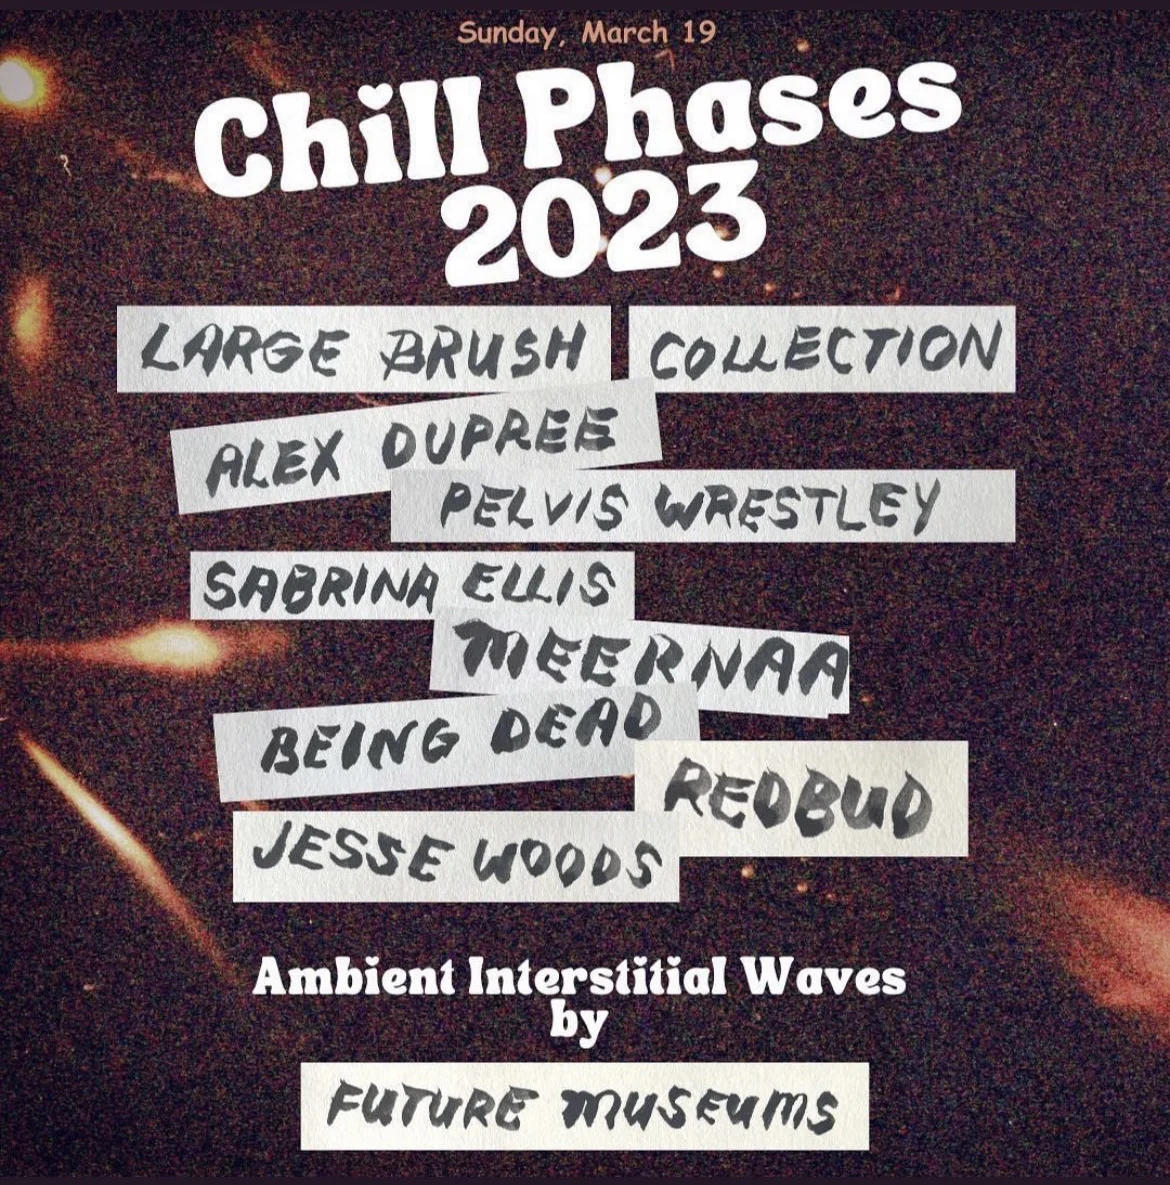 Sunday, March 19, 2023, Chill Phases 2023, Large Brush Collection, Alex Dupree, Pelvis Wrestley, Sabrina Ellis, Meernaa, Being Dead, Redbud, Jesse Woods, ambient interstitial waves by Future Museums